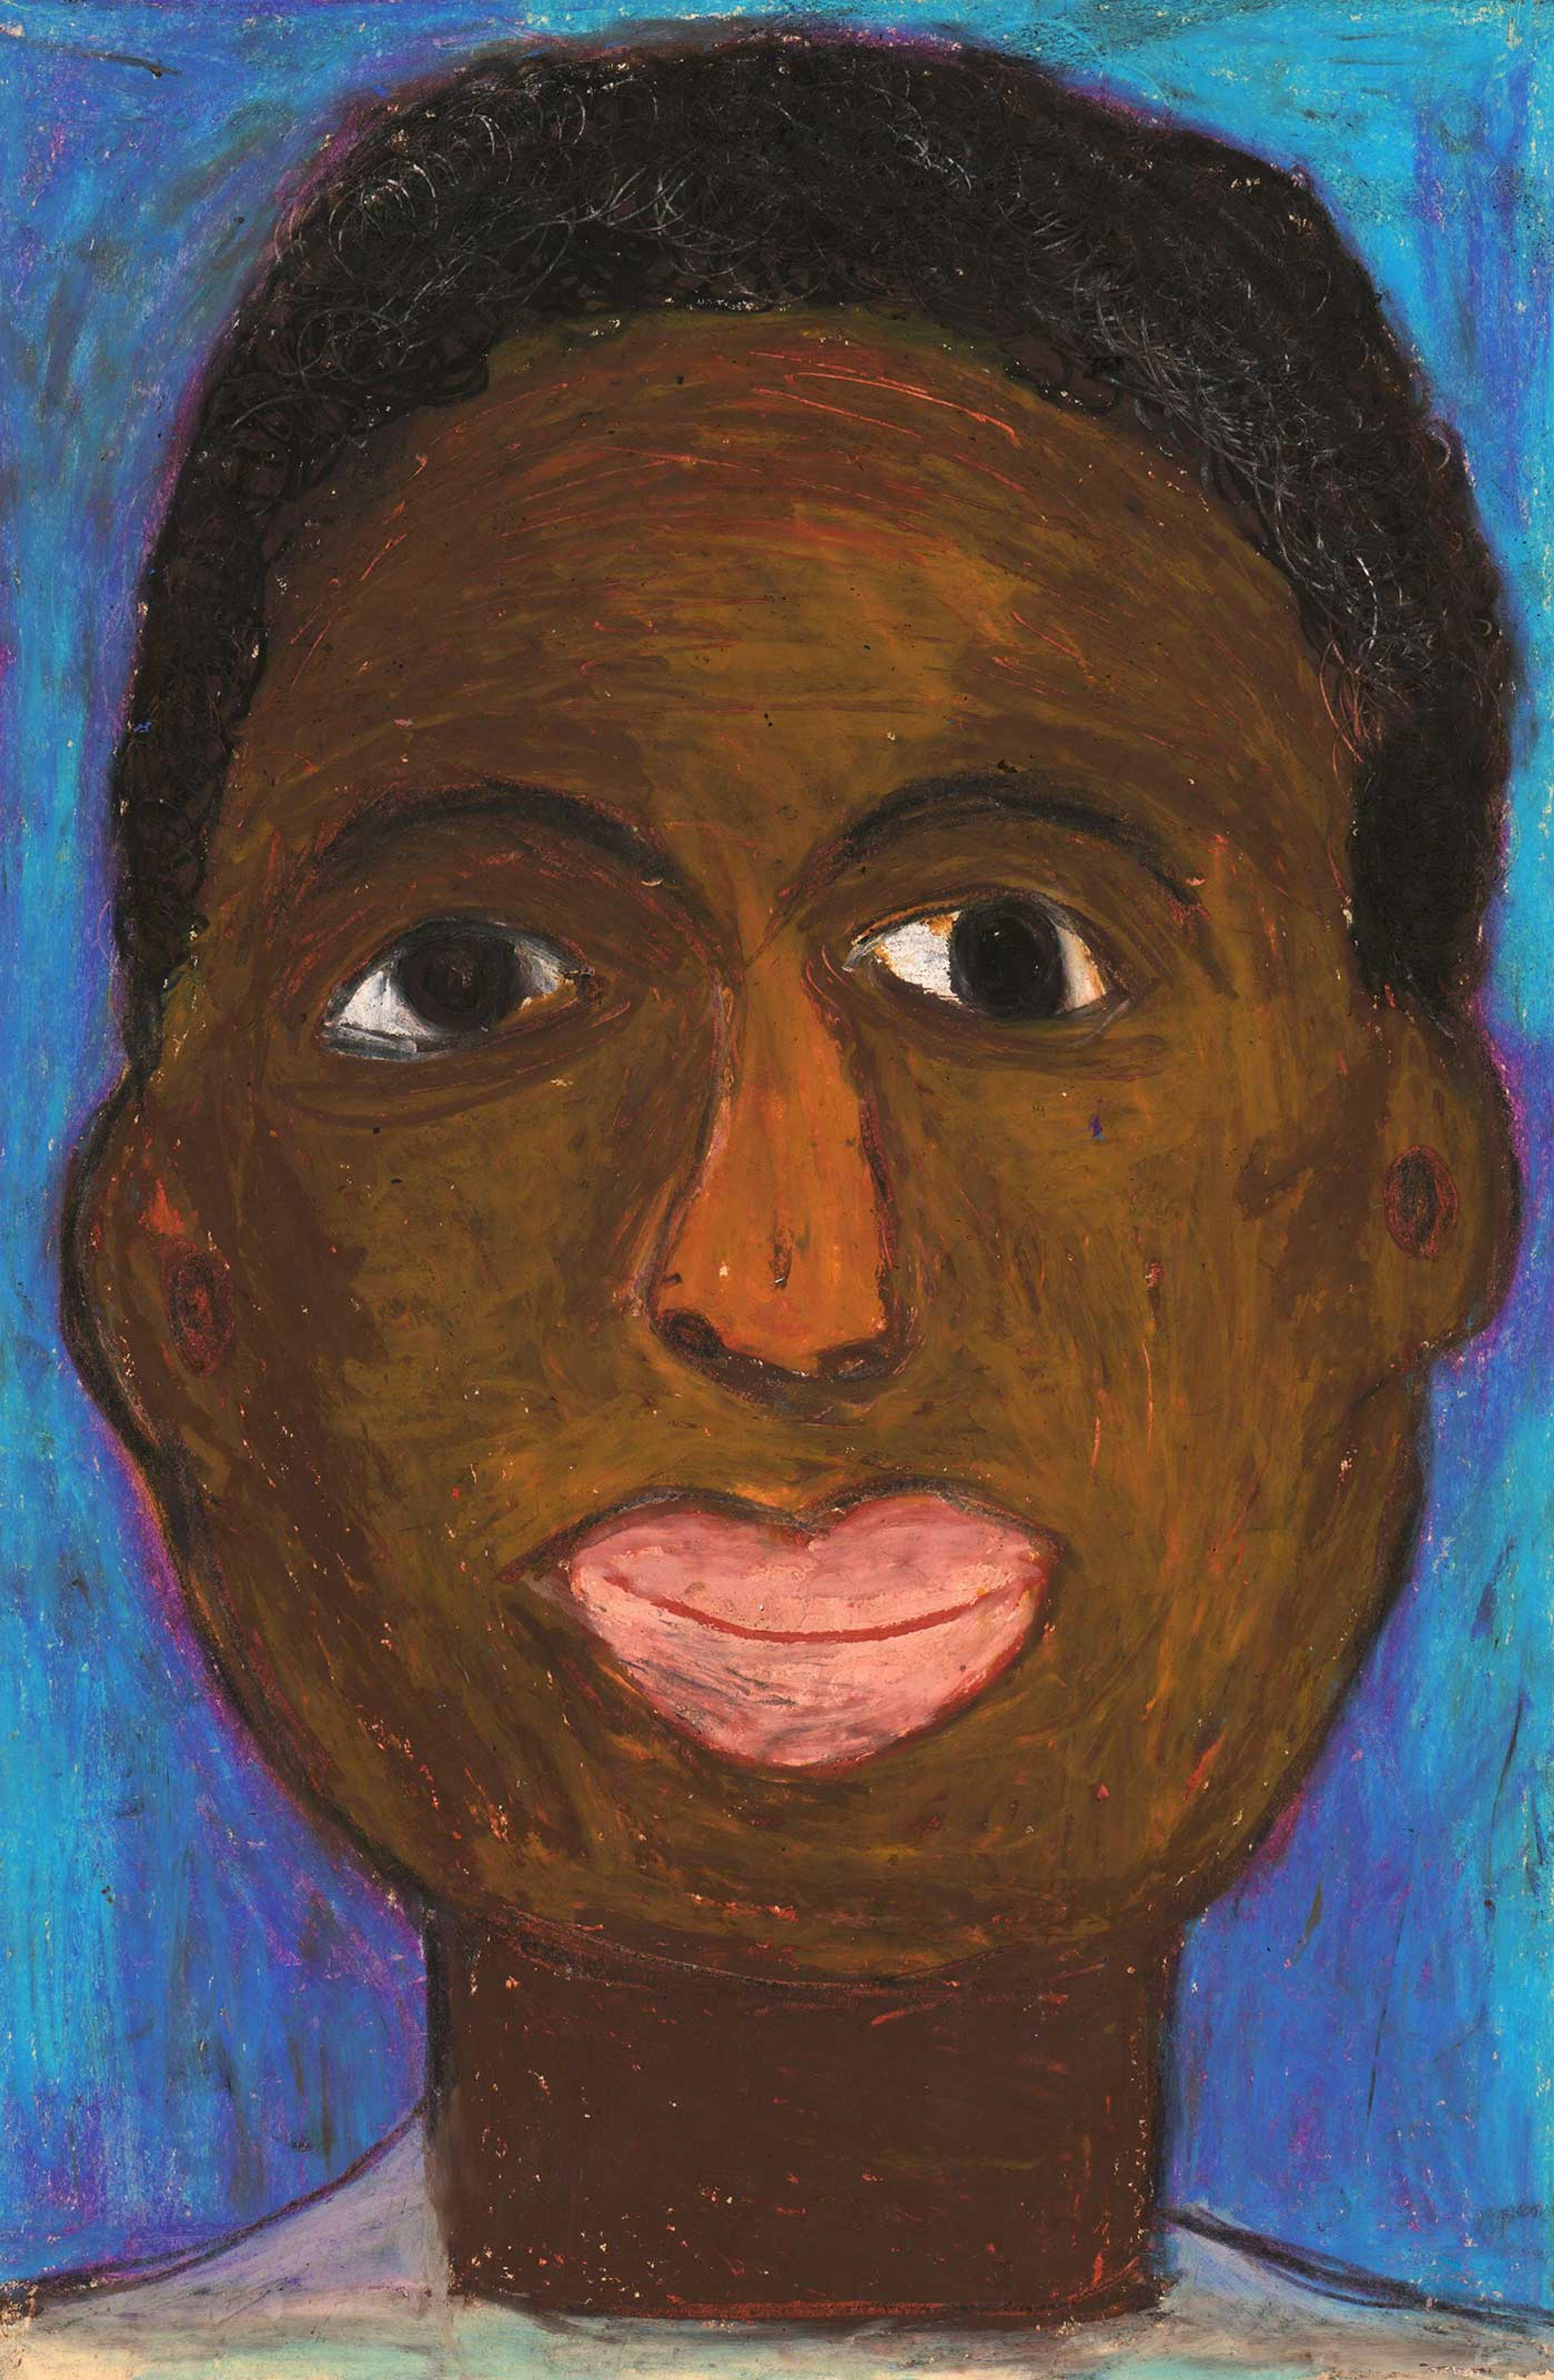 Drawing of a young boy with brown skin on a blue background.